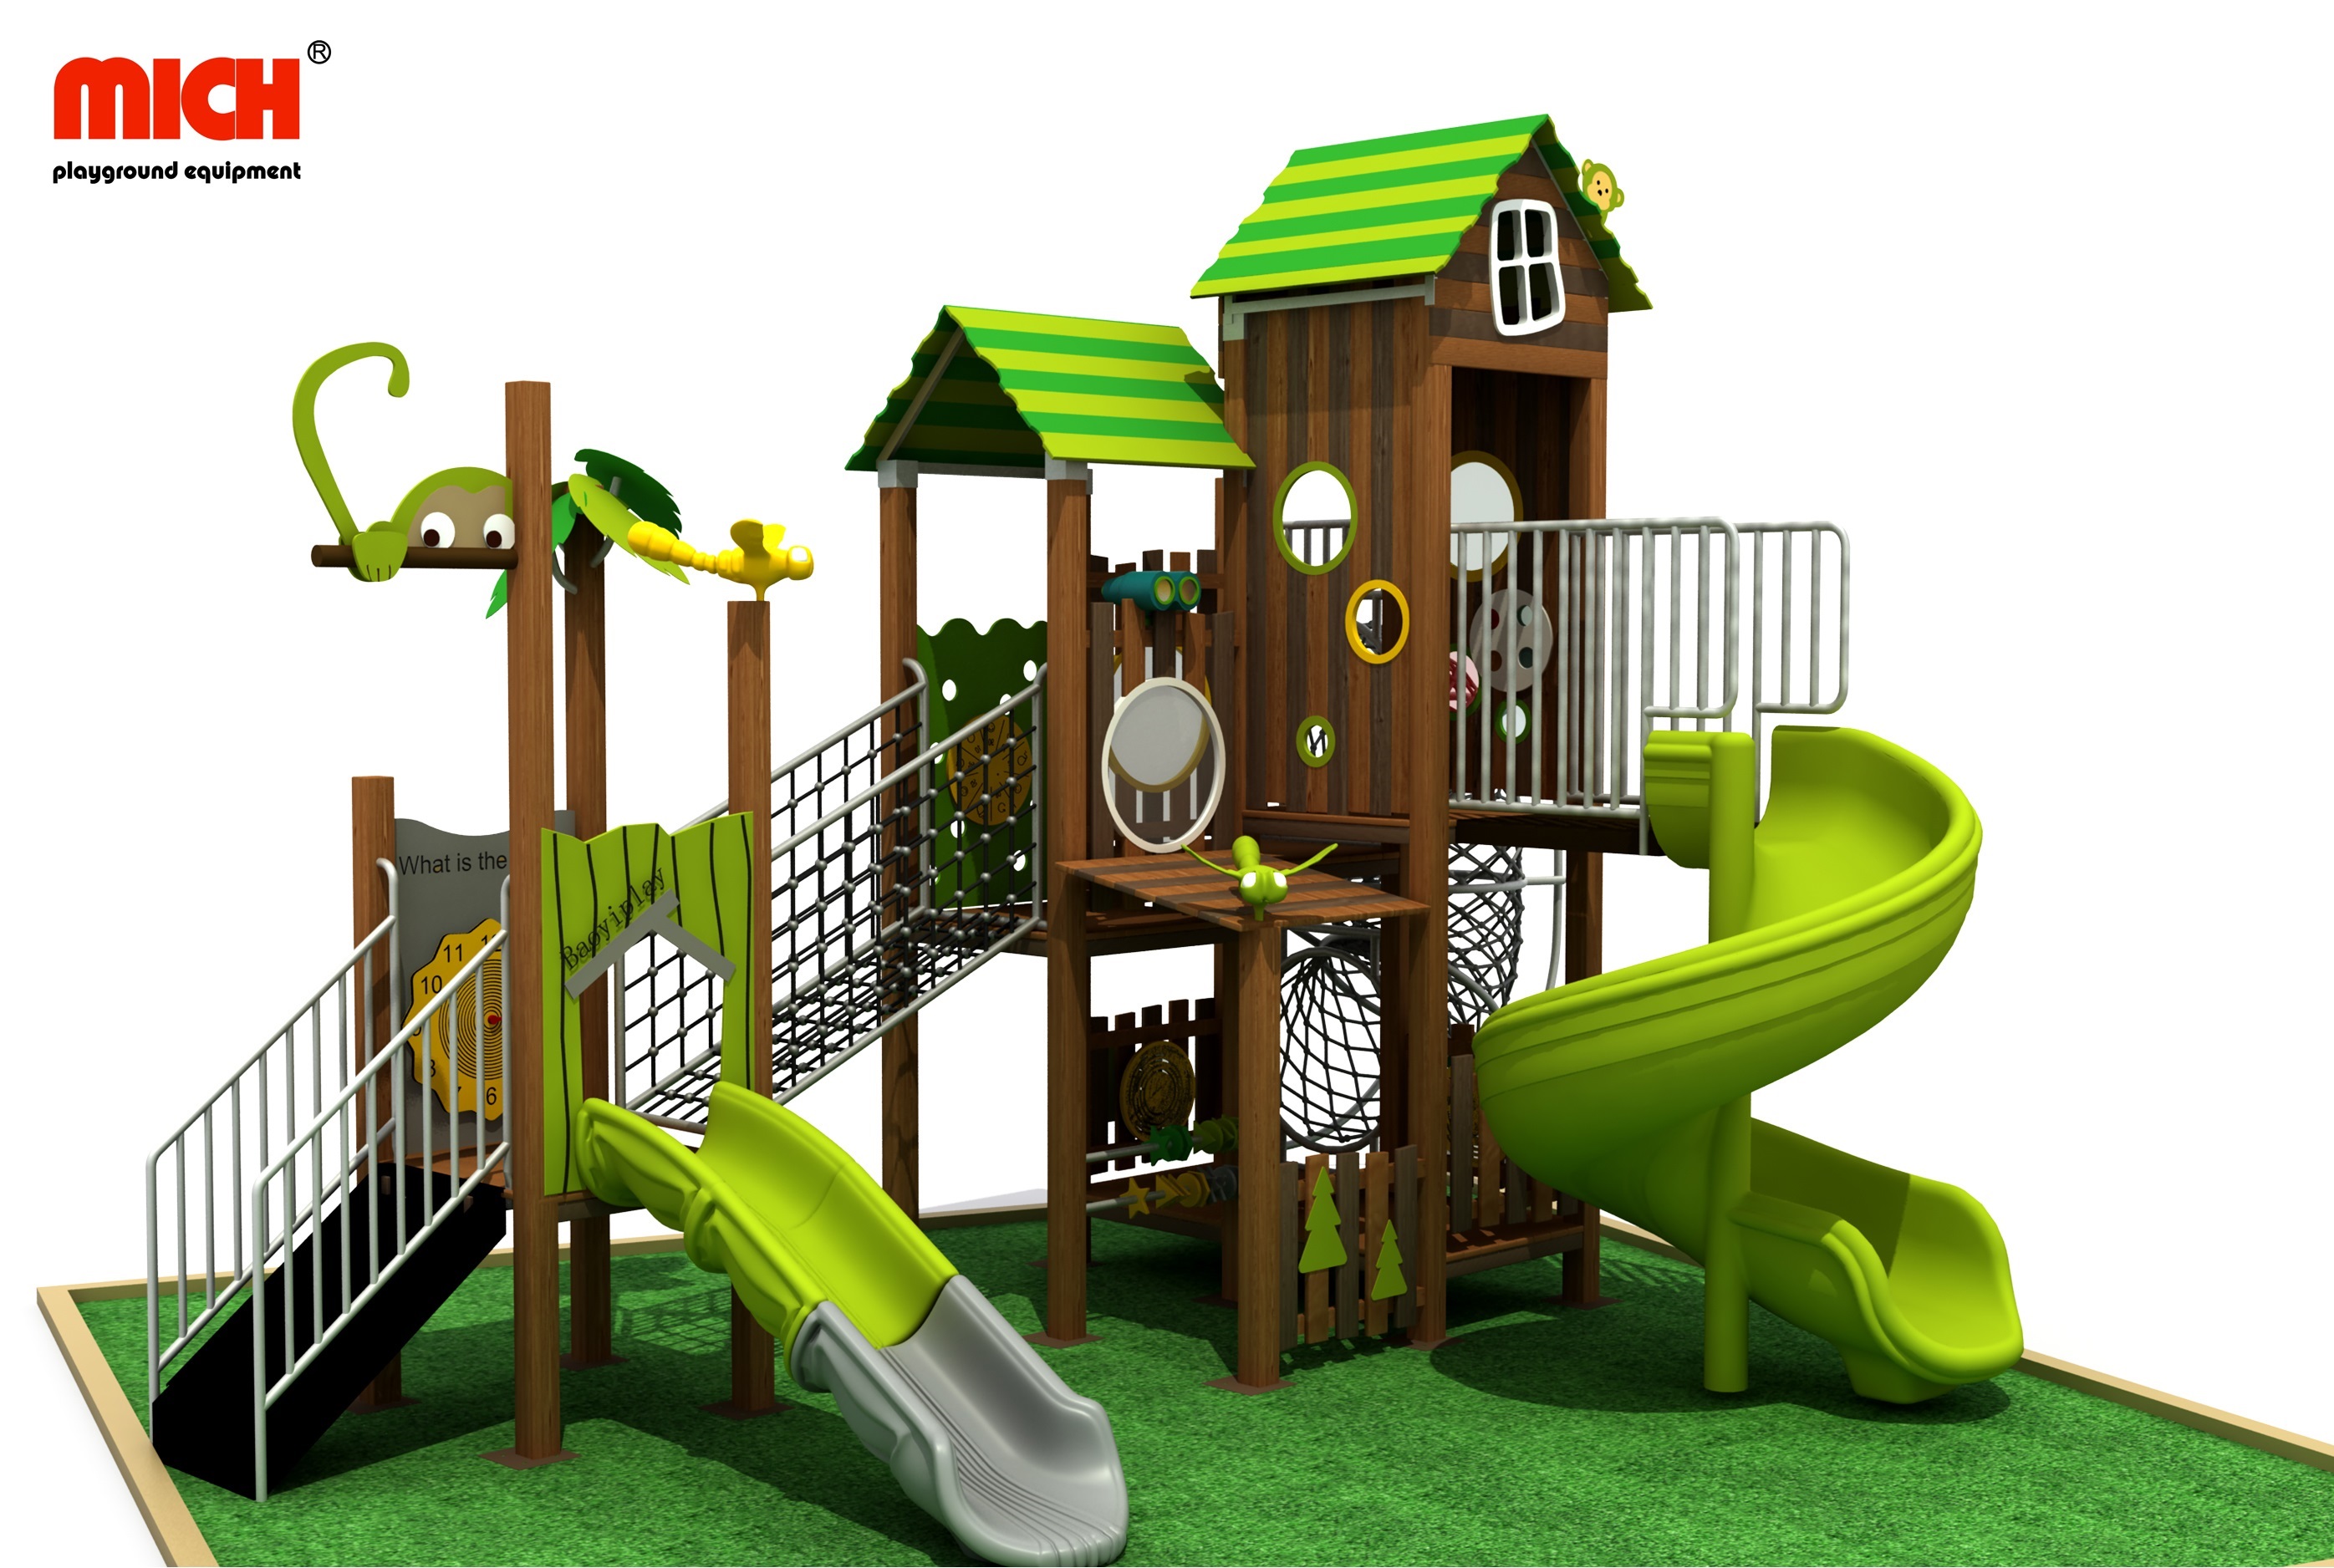 Why buy branded outdoor playground equipment?